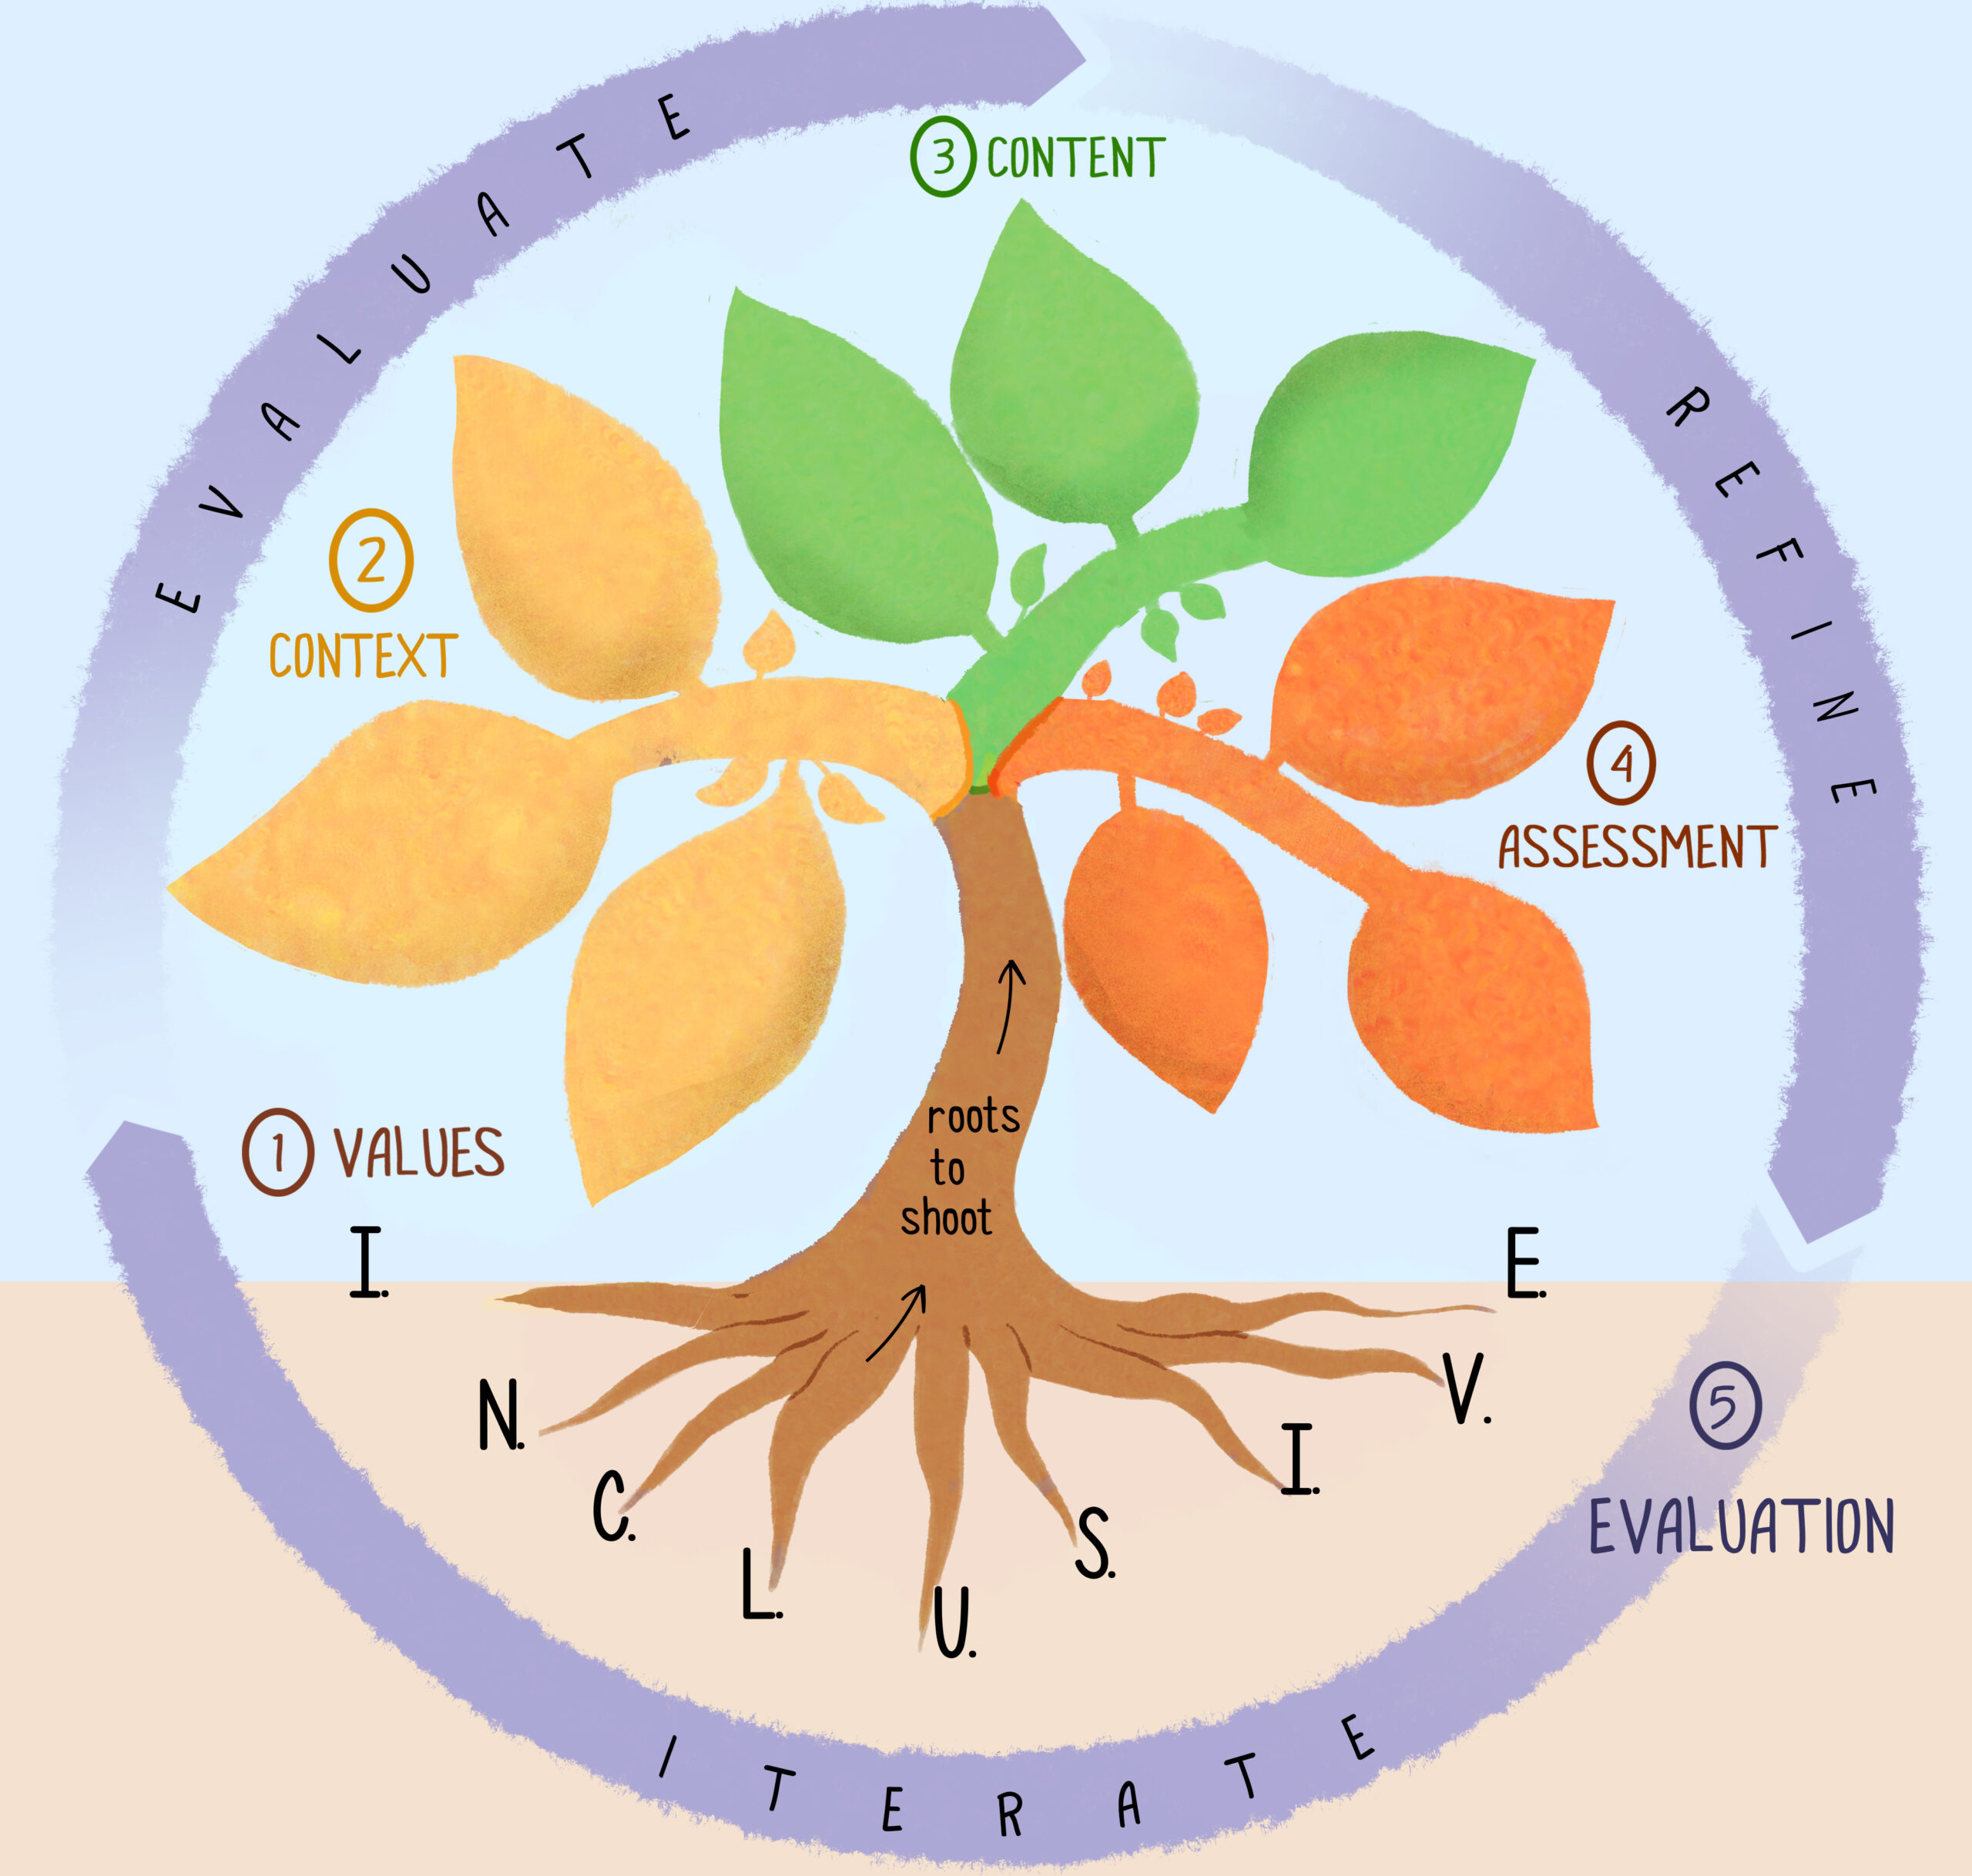 the inclusive learning design tree with the labels 1. values (the roots); 2. context (the left branch); 3. content (the middle branch); 4. assessment (the right branch) and 5 evaluation (the circle around the tree), with the words: evaluate, refine, iterate.